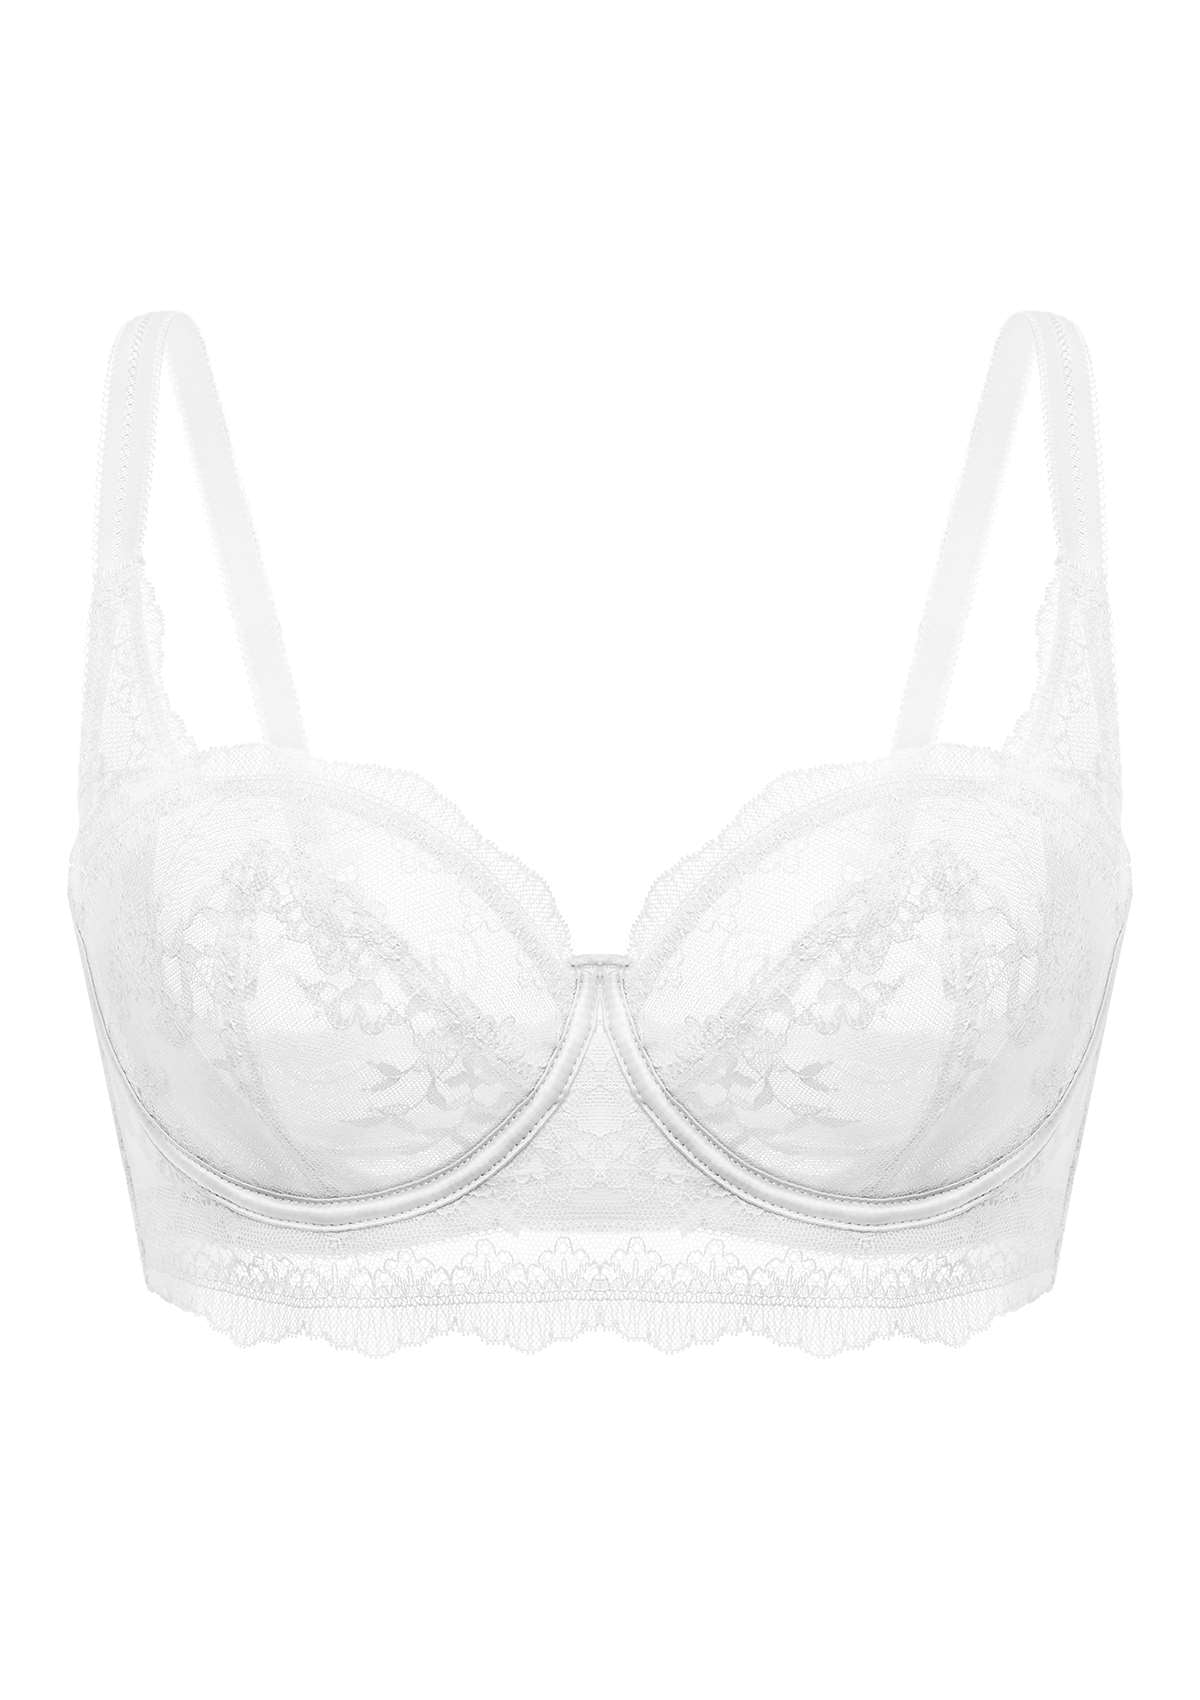 HSIA I Do Floral Lace Bridal Balconette Beautiful Bra For Special Day - White / 36 / DDD/F